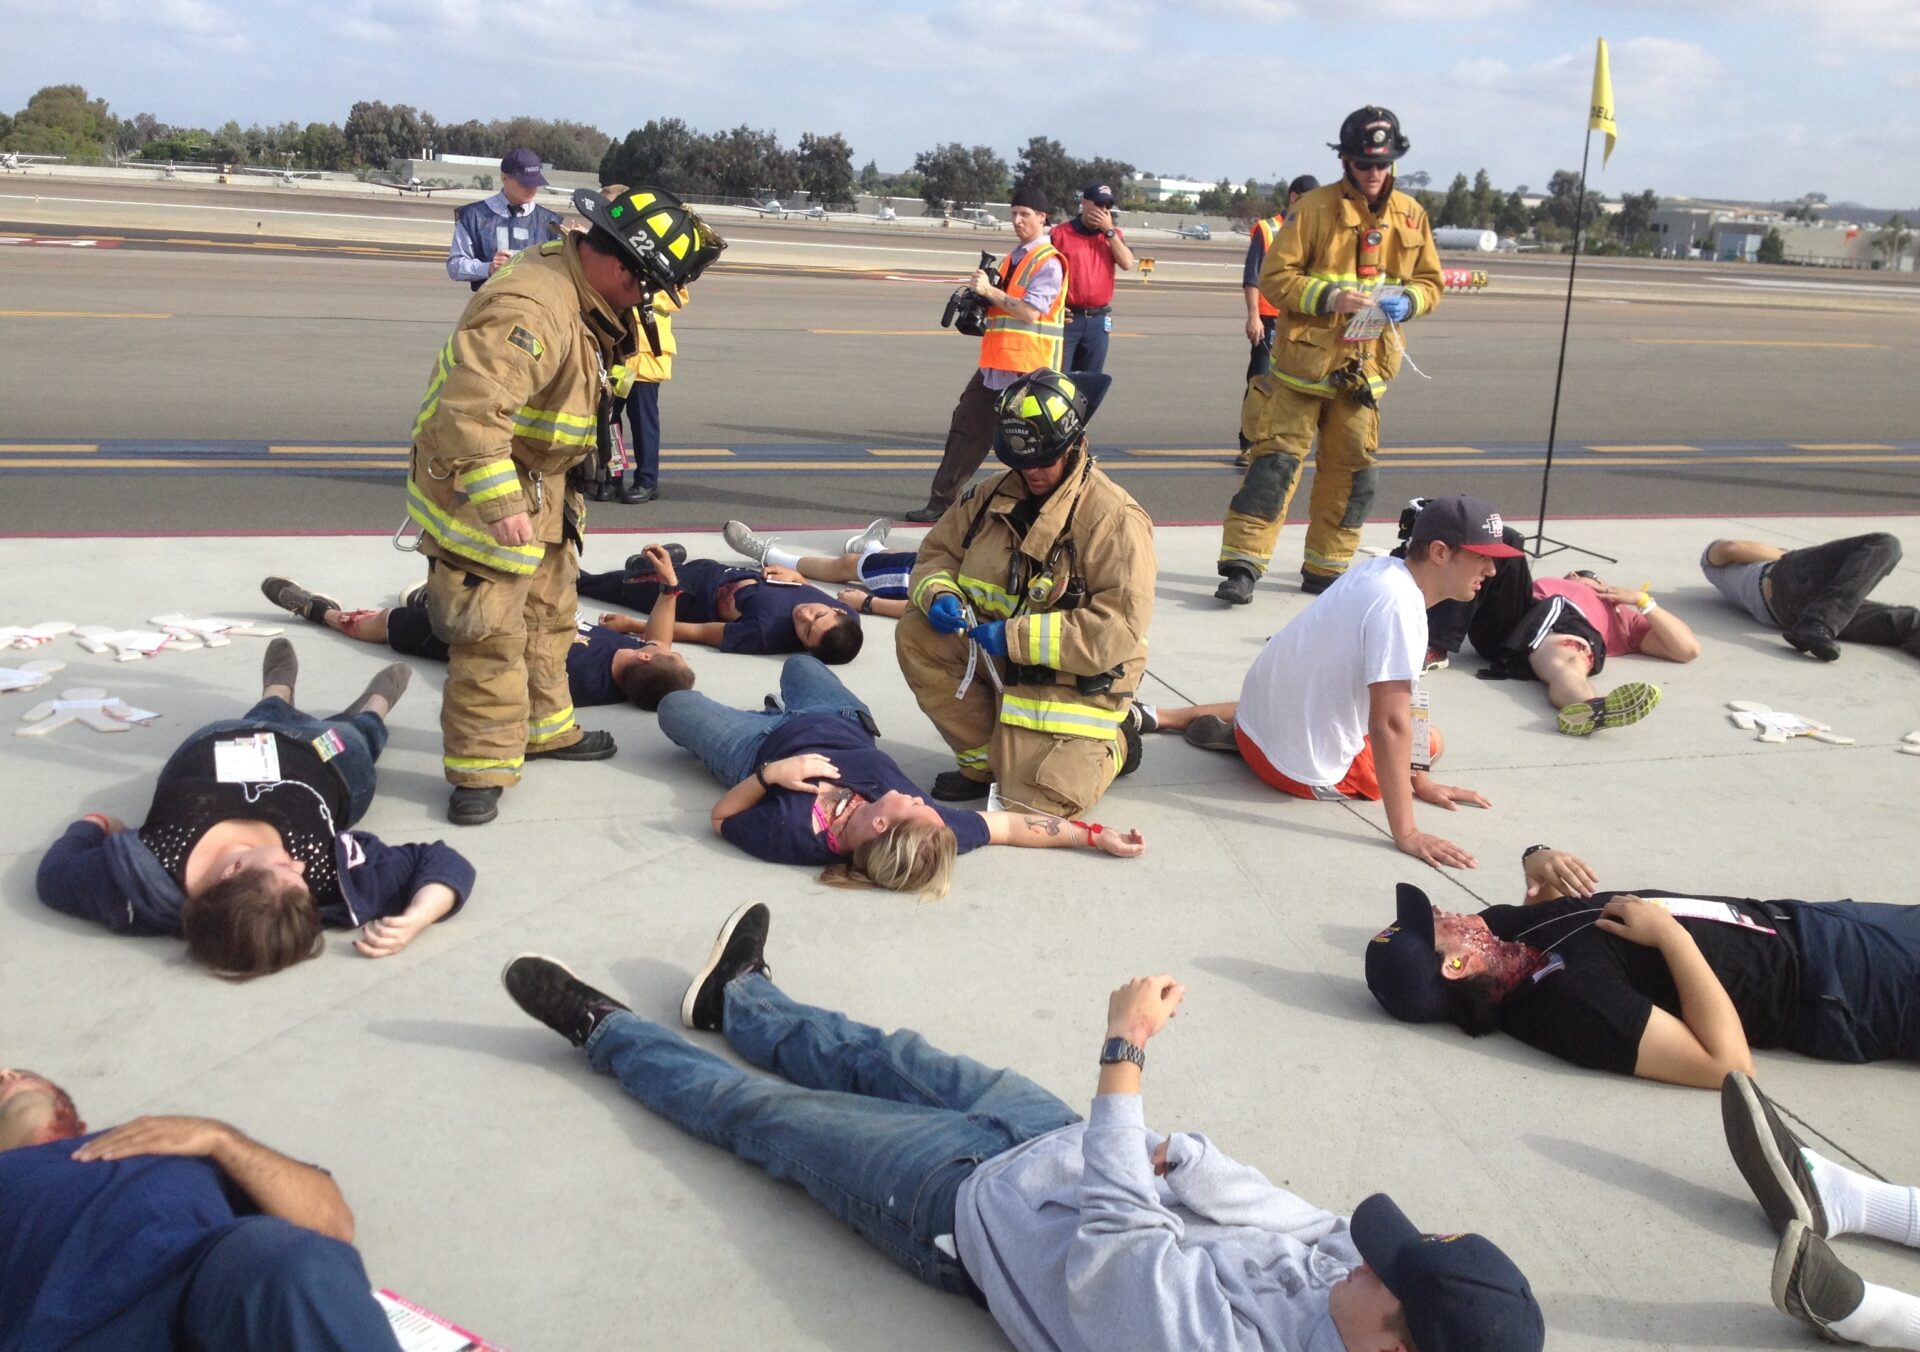 firefighters assistant actors laying on ground